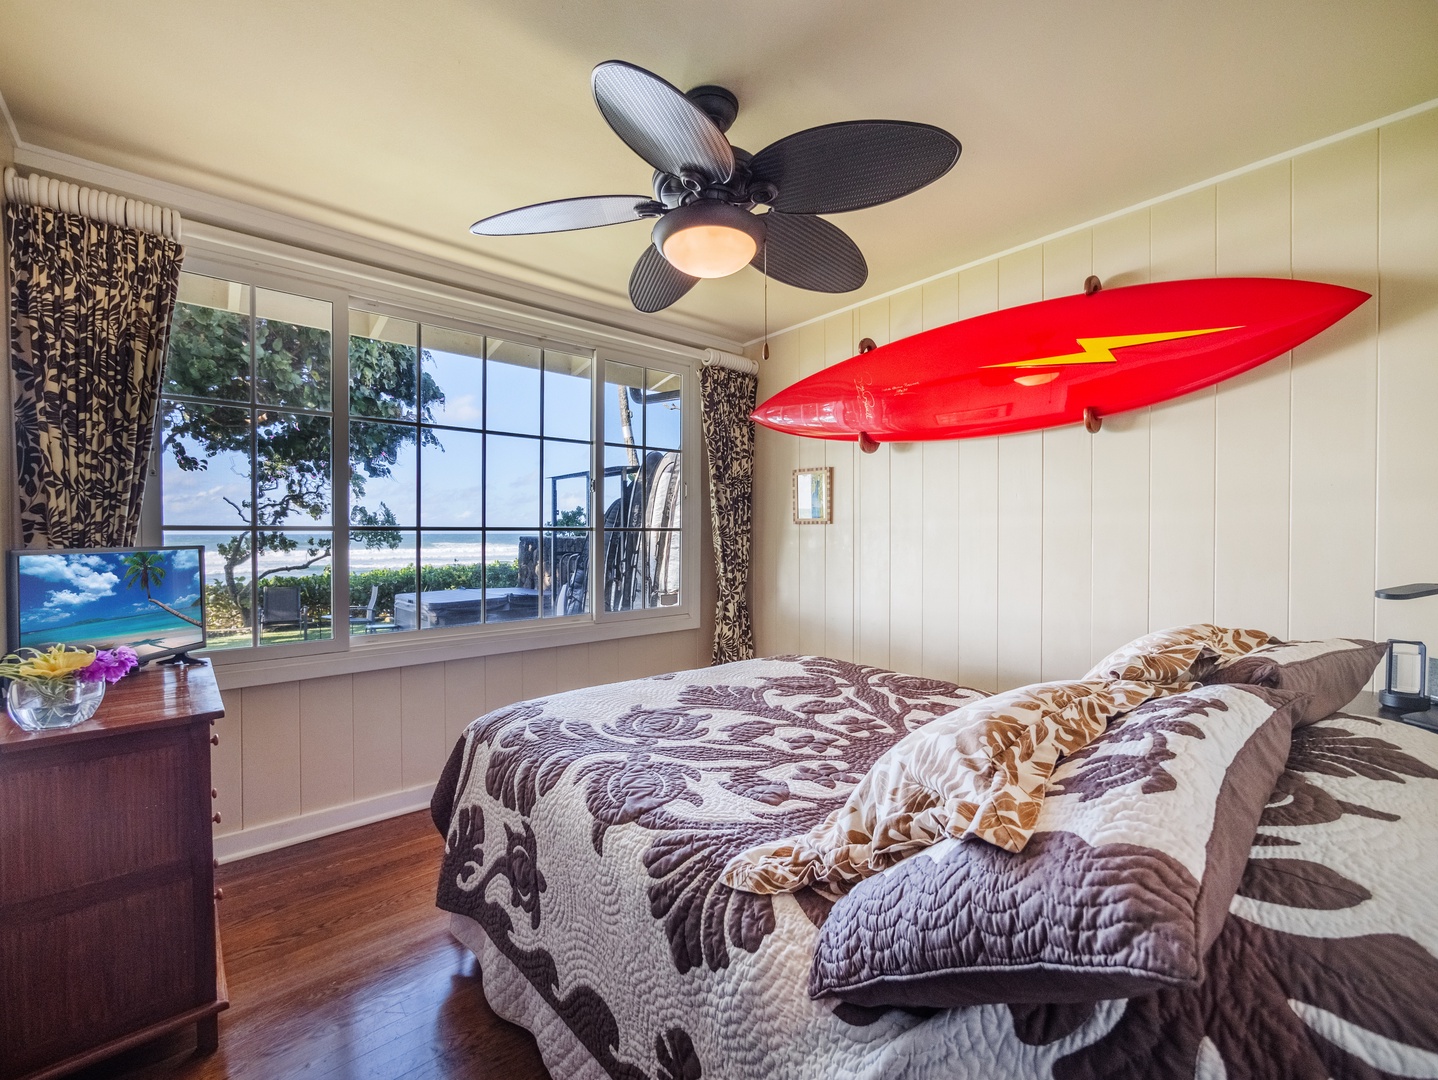 Haleiwa Vacation Rentals, Sunset Point Hawaiian Beachfront** - With large windows to wake up with scenic views.